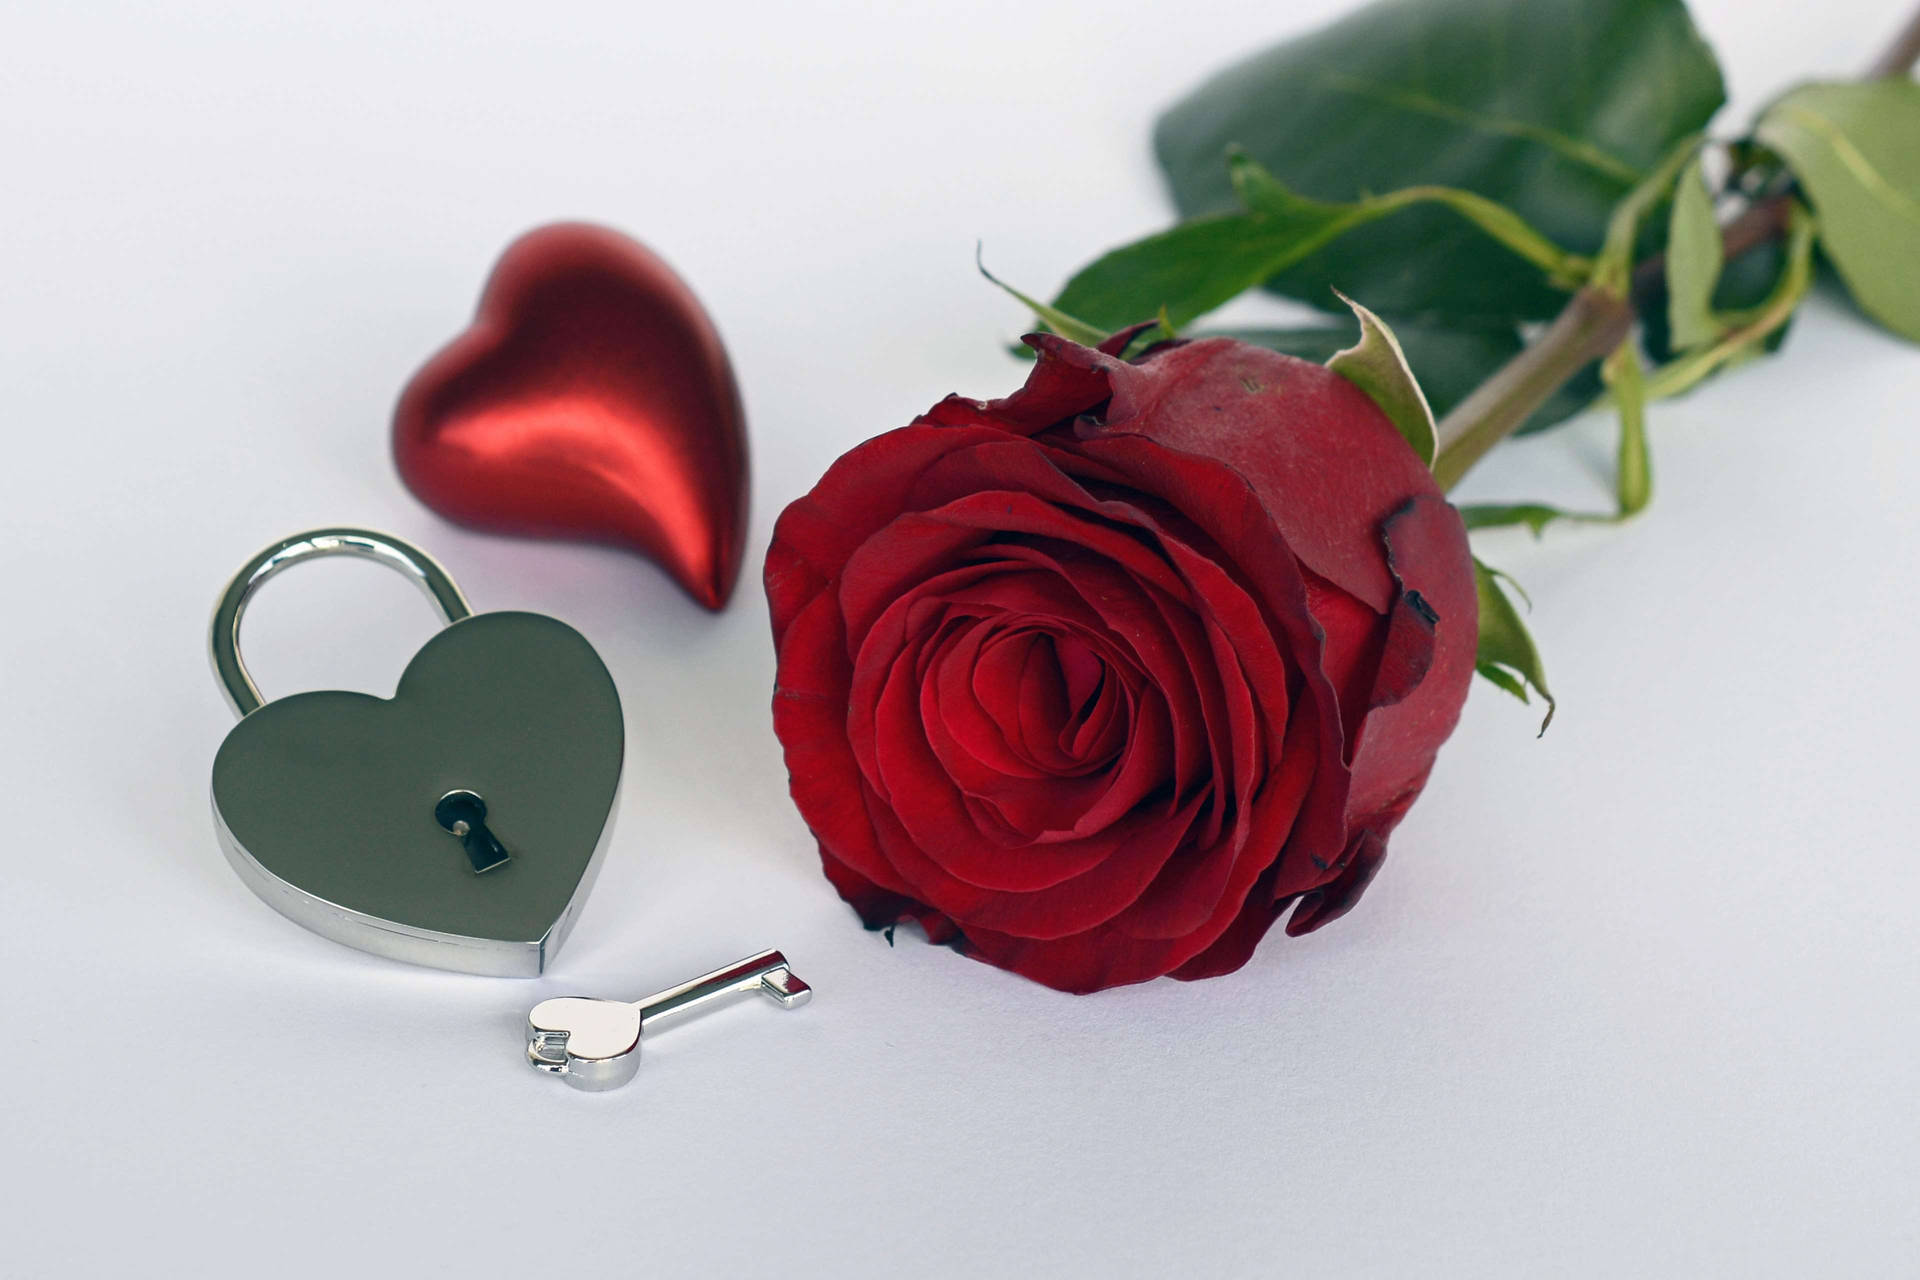 Romantic Rose And Heart-shaped Lock Background